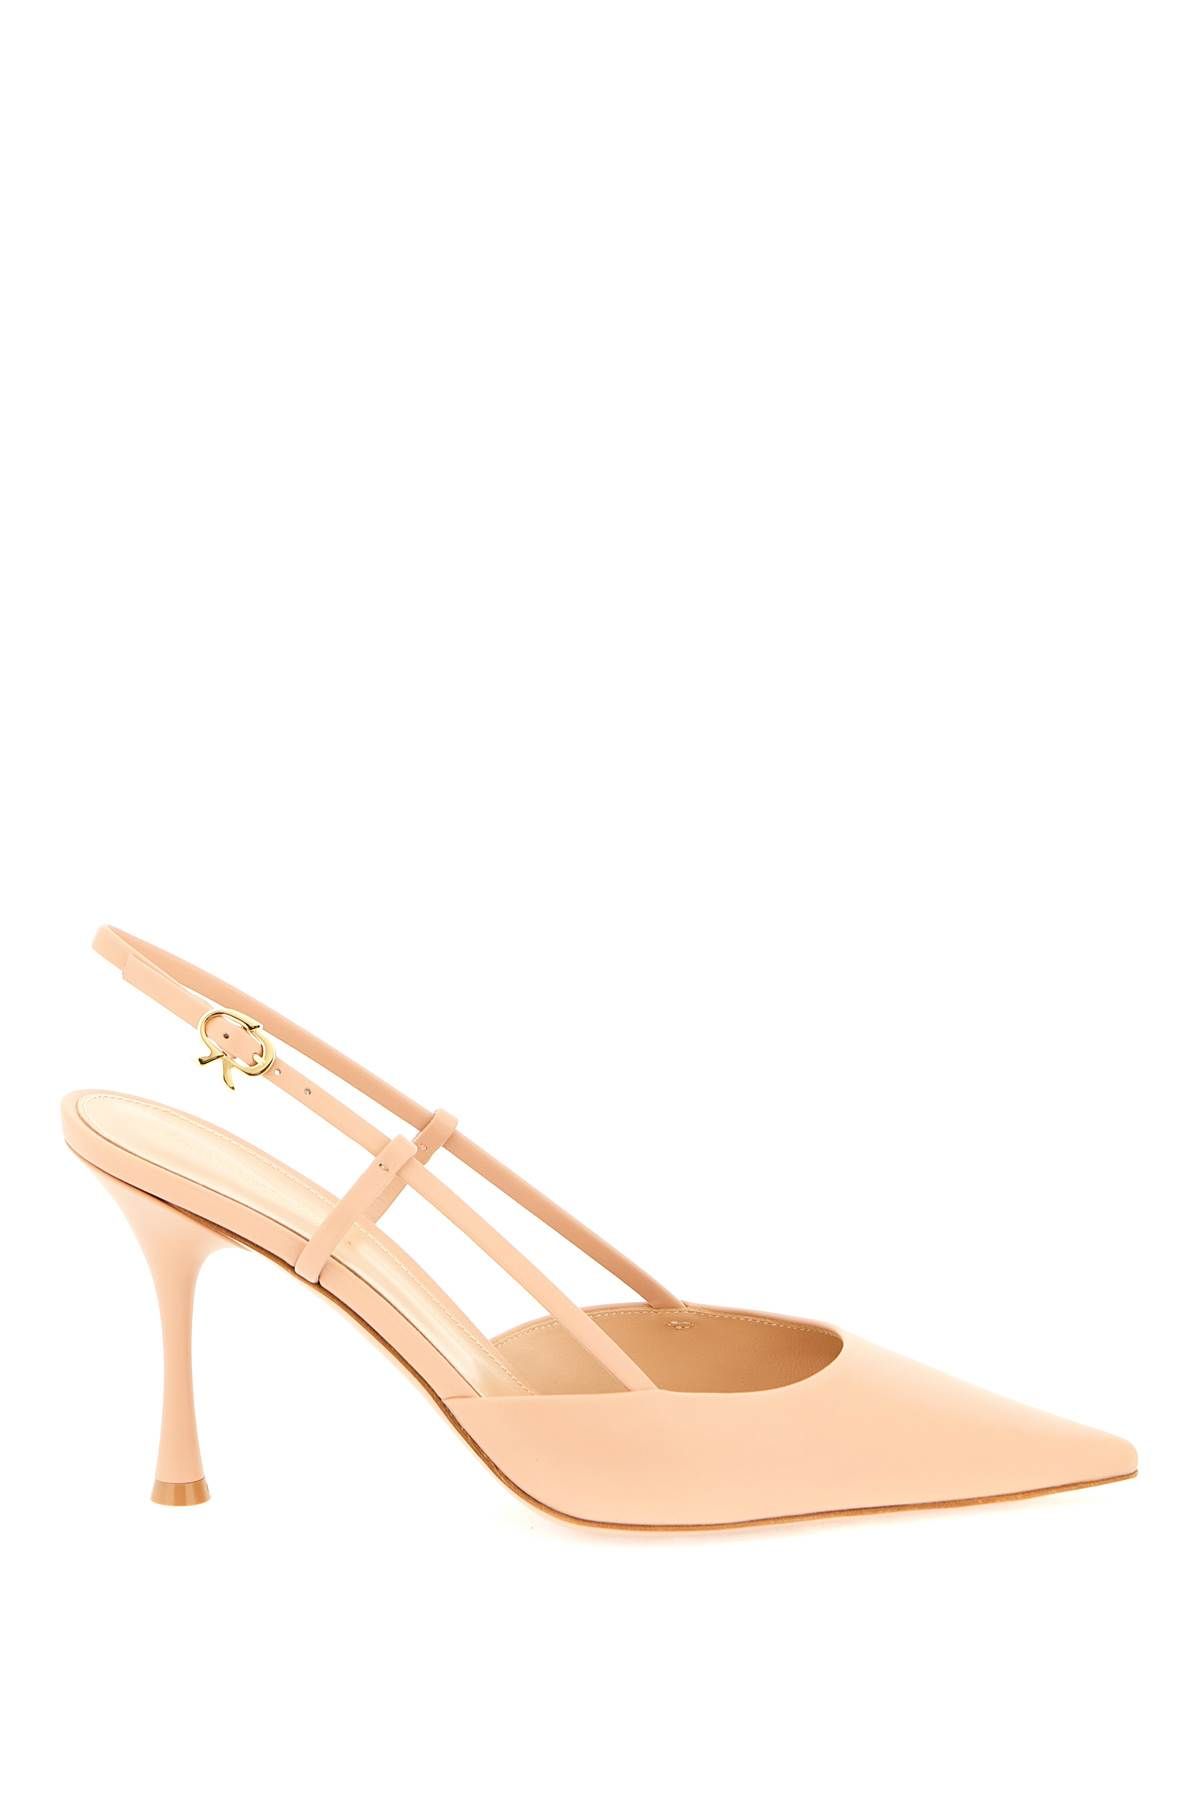 Gianvito Rossi Ascent Powder Pink Pumps In Brown